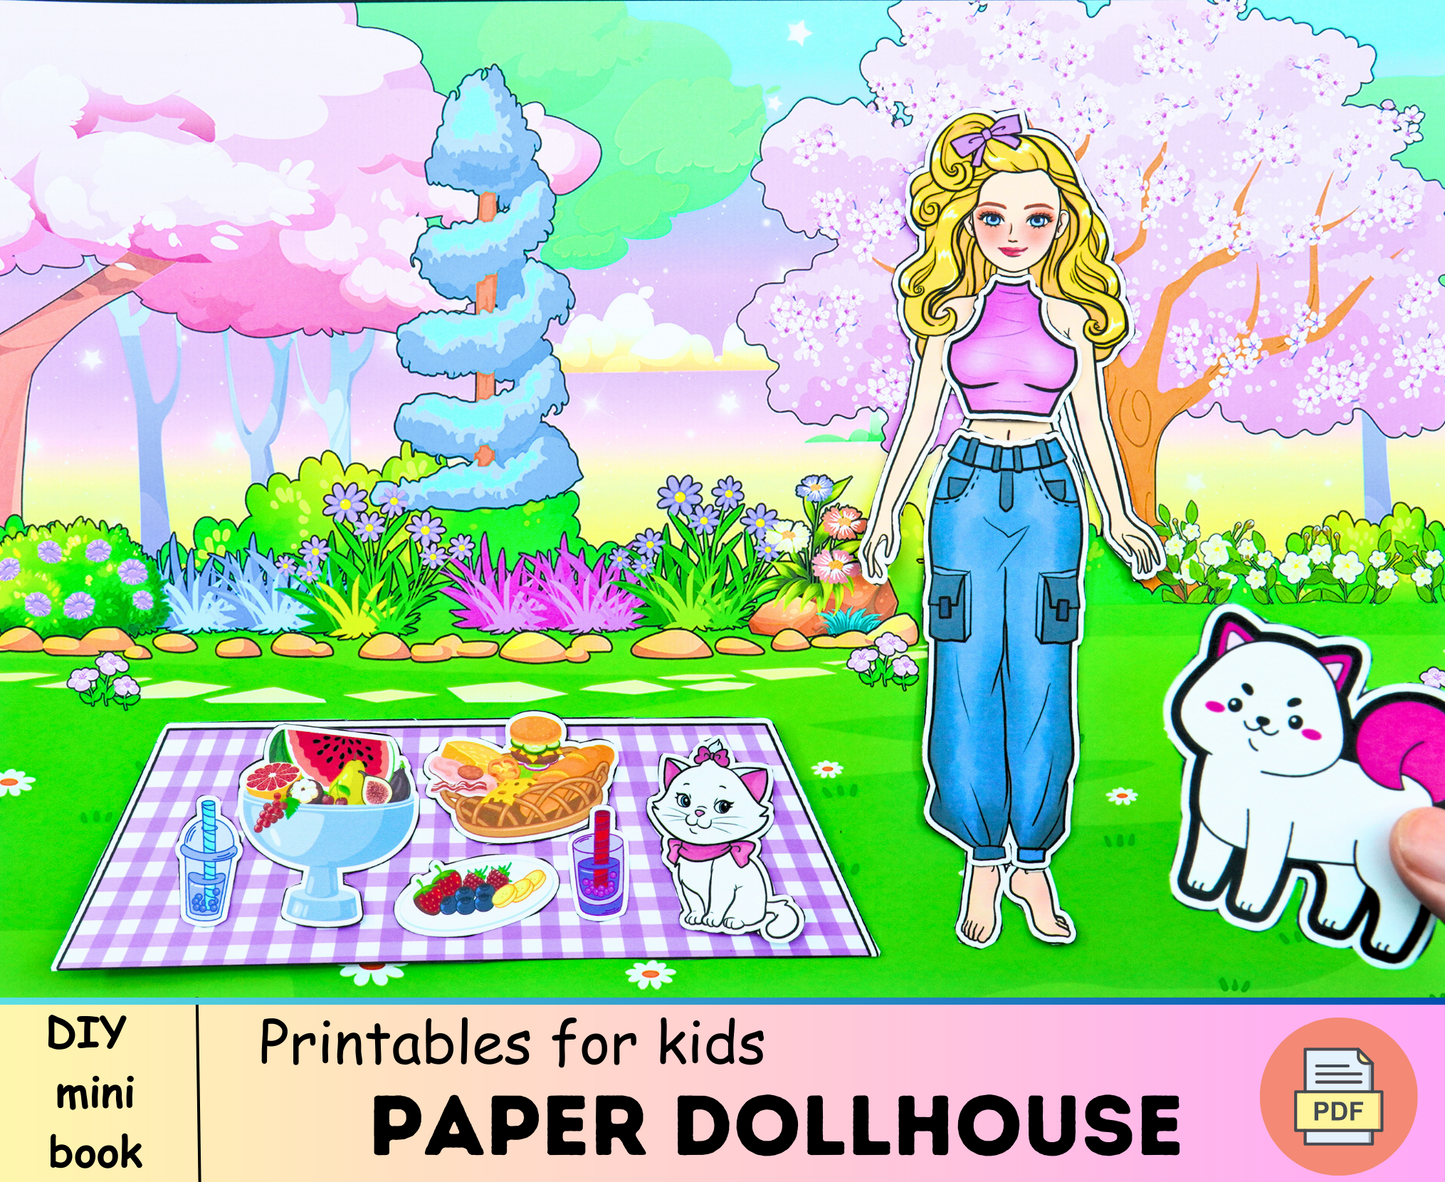 Handmade dress for Barbie and Enid paper doll printables 🌈 Wardrobe for paper doll | Princess Outfits 🌈 Woa Doll Crafts